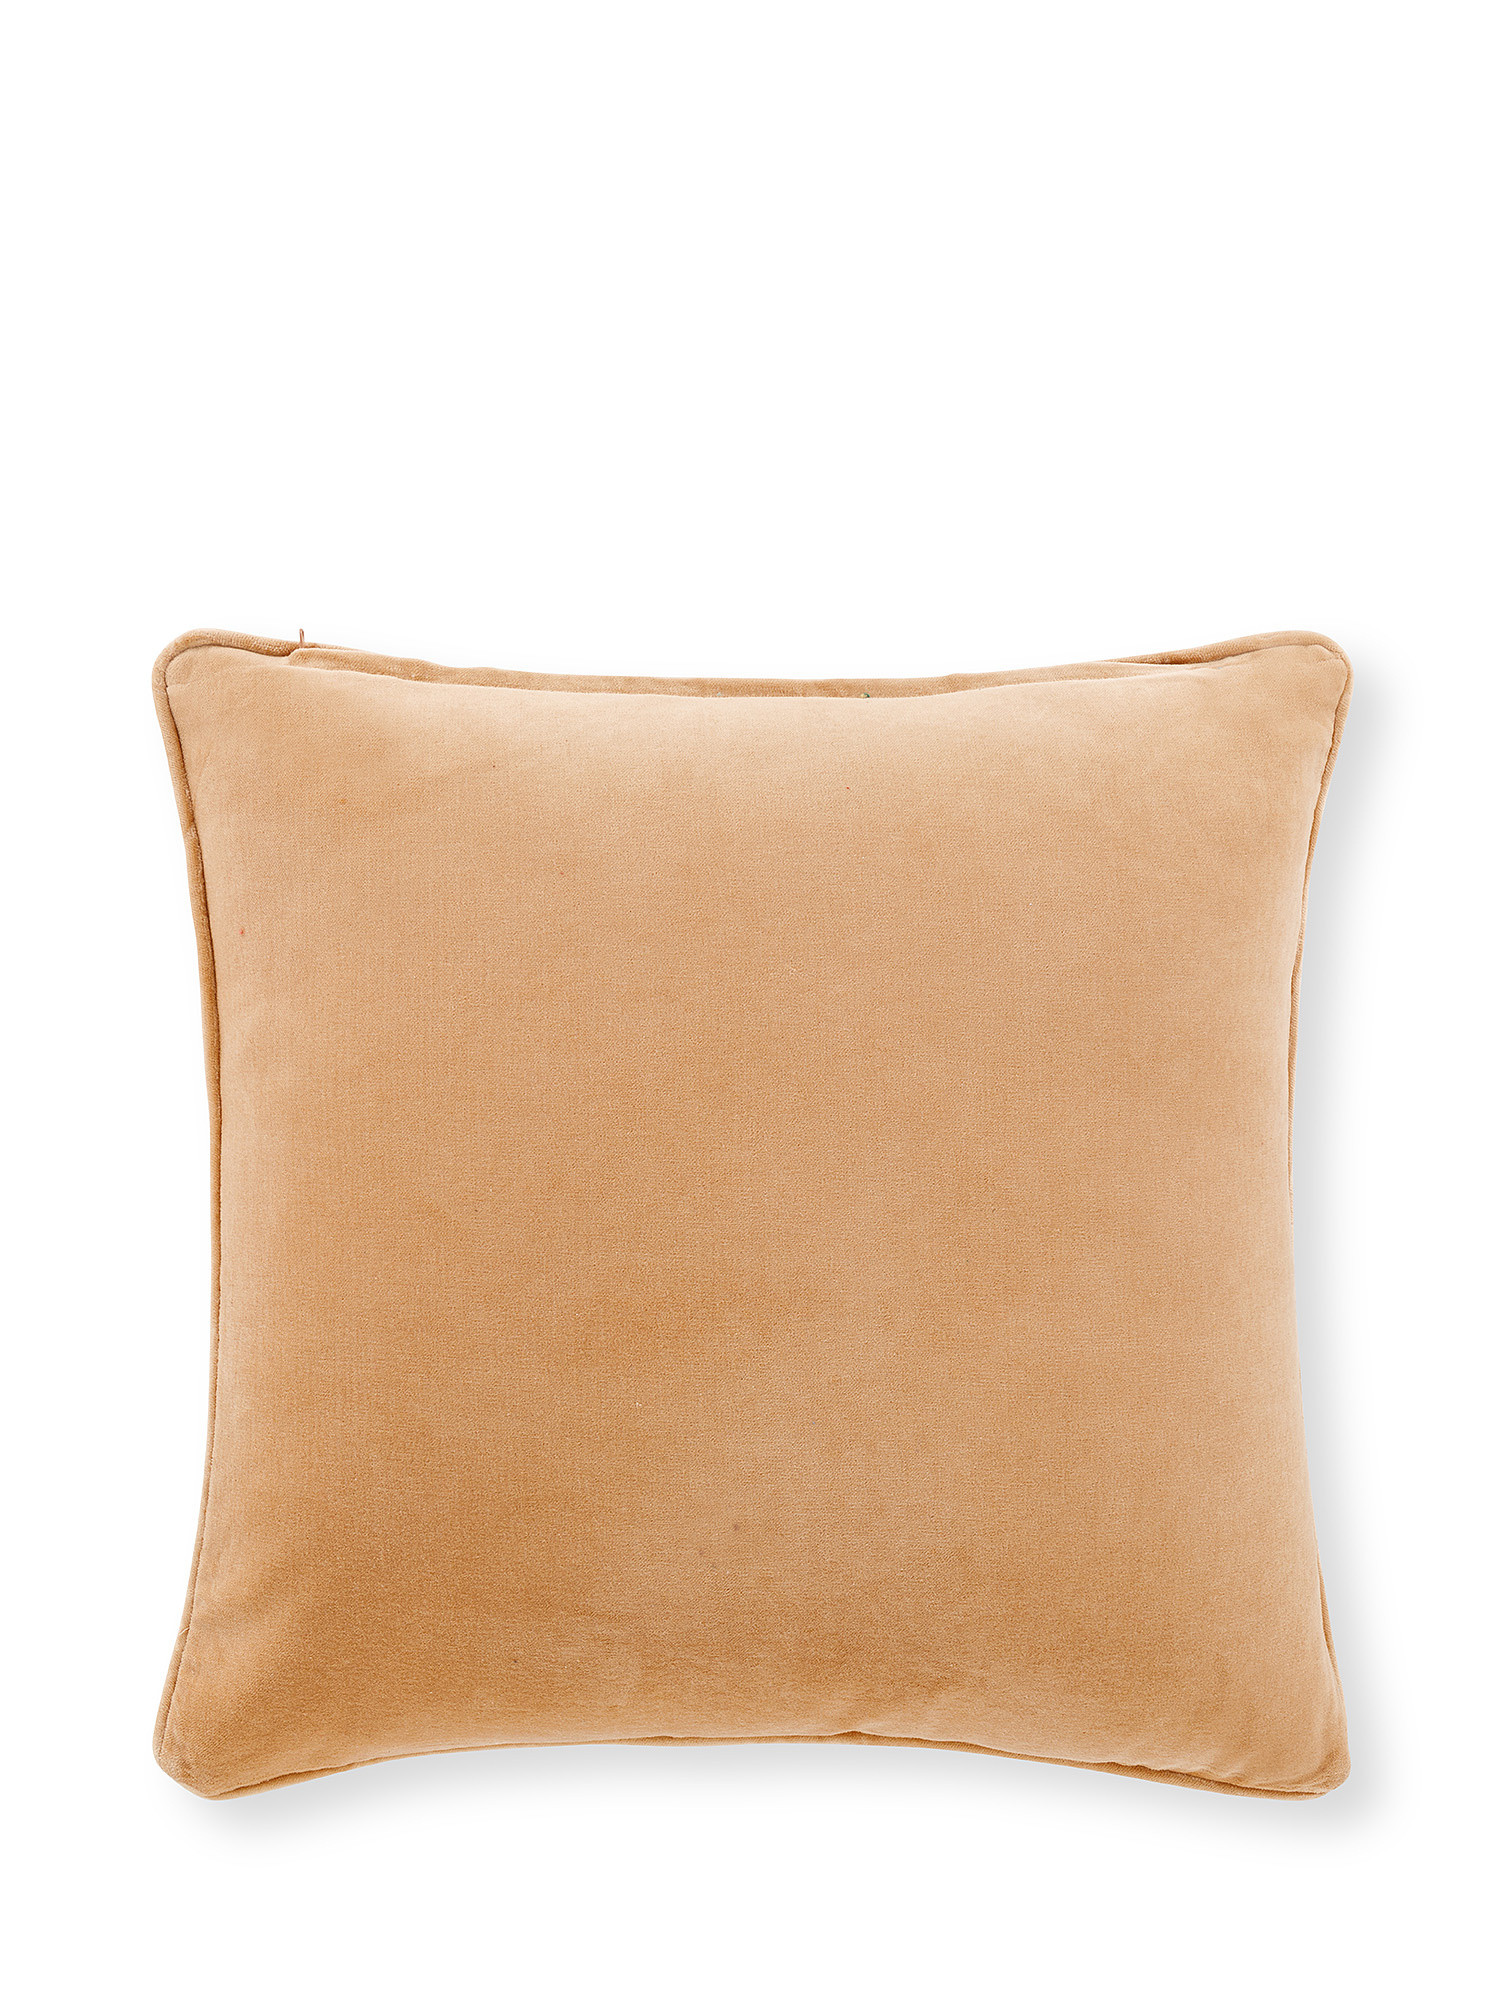 Velvet cushion with flower embroidery 45x45cm, Beige, large image number 1